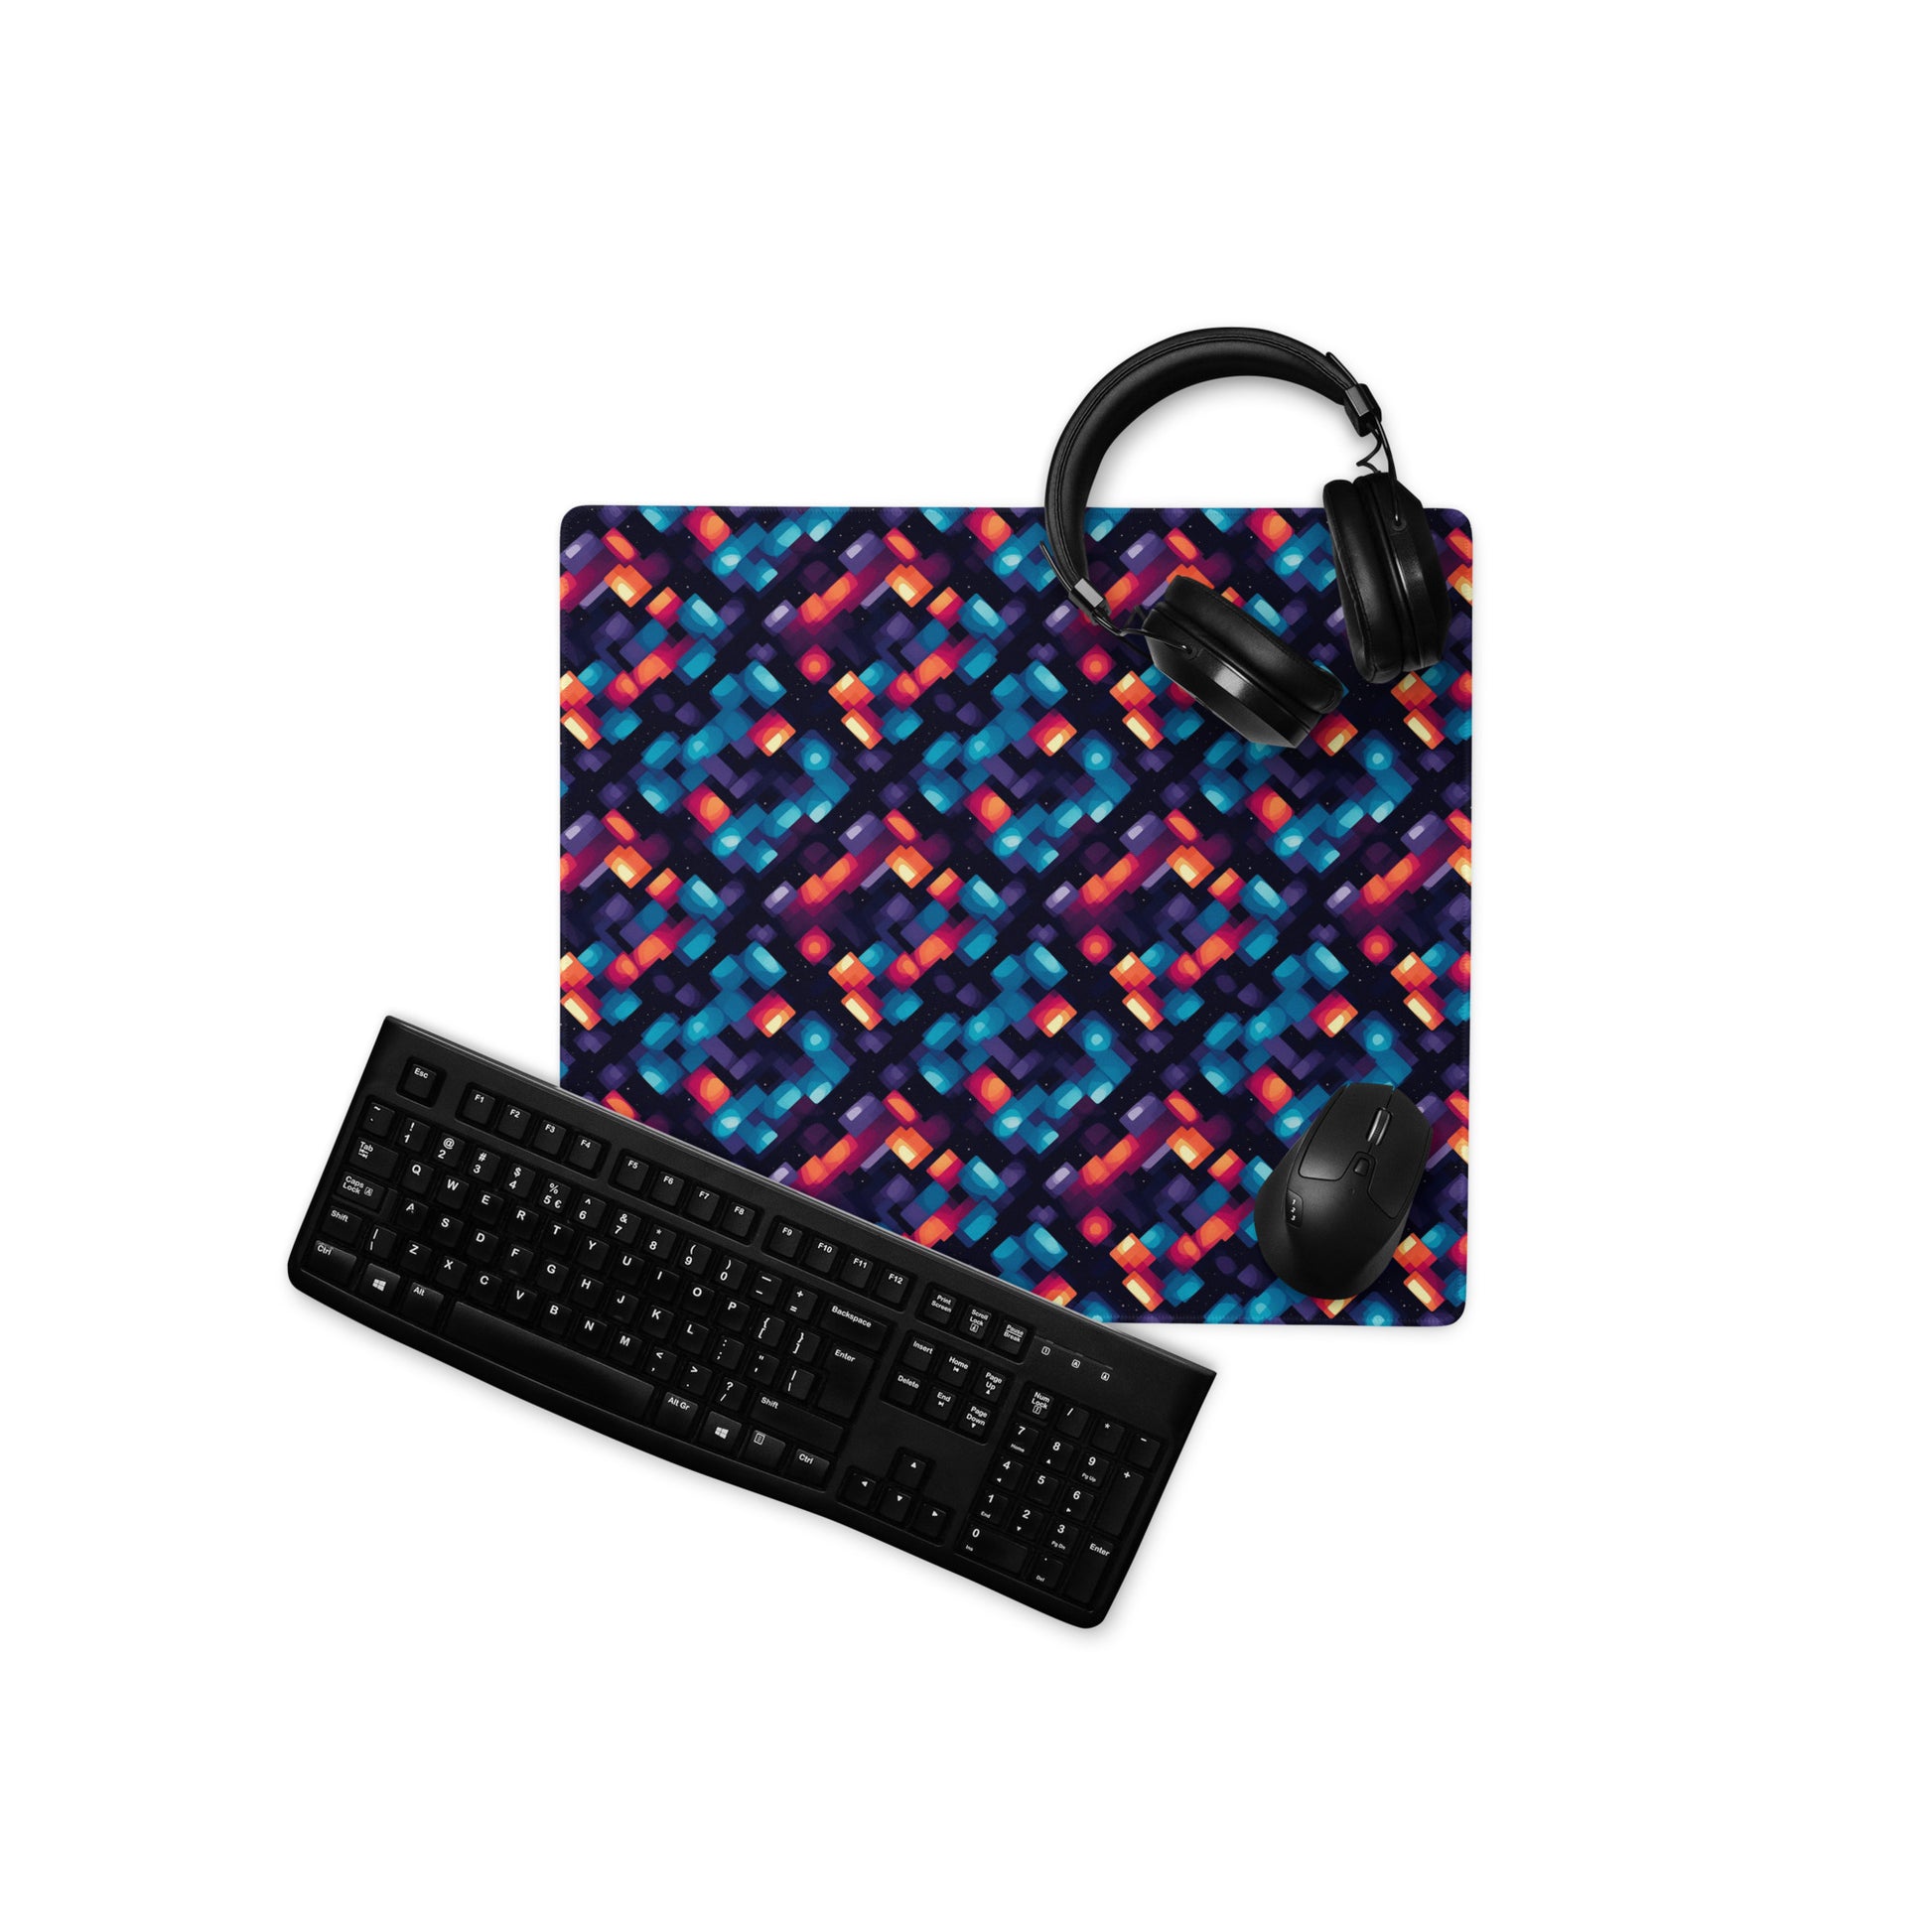 alt text- A 18" x 16" desk pad with blue and orange abstract pattern. With a keyboard, mouse, and headphones sitting on it.